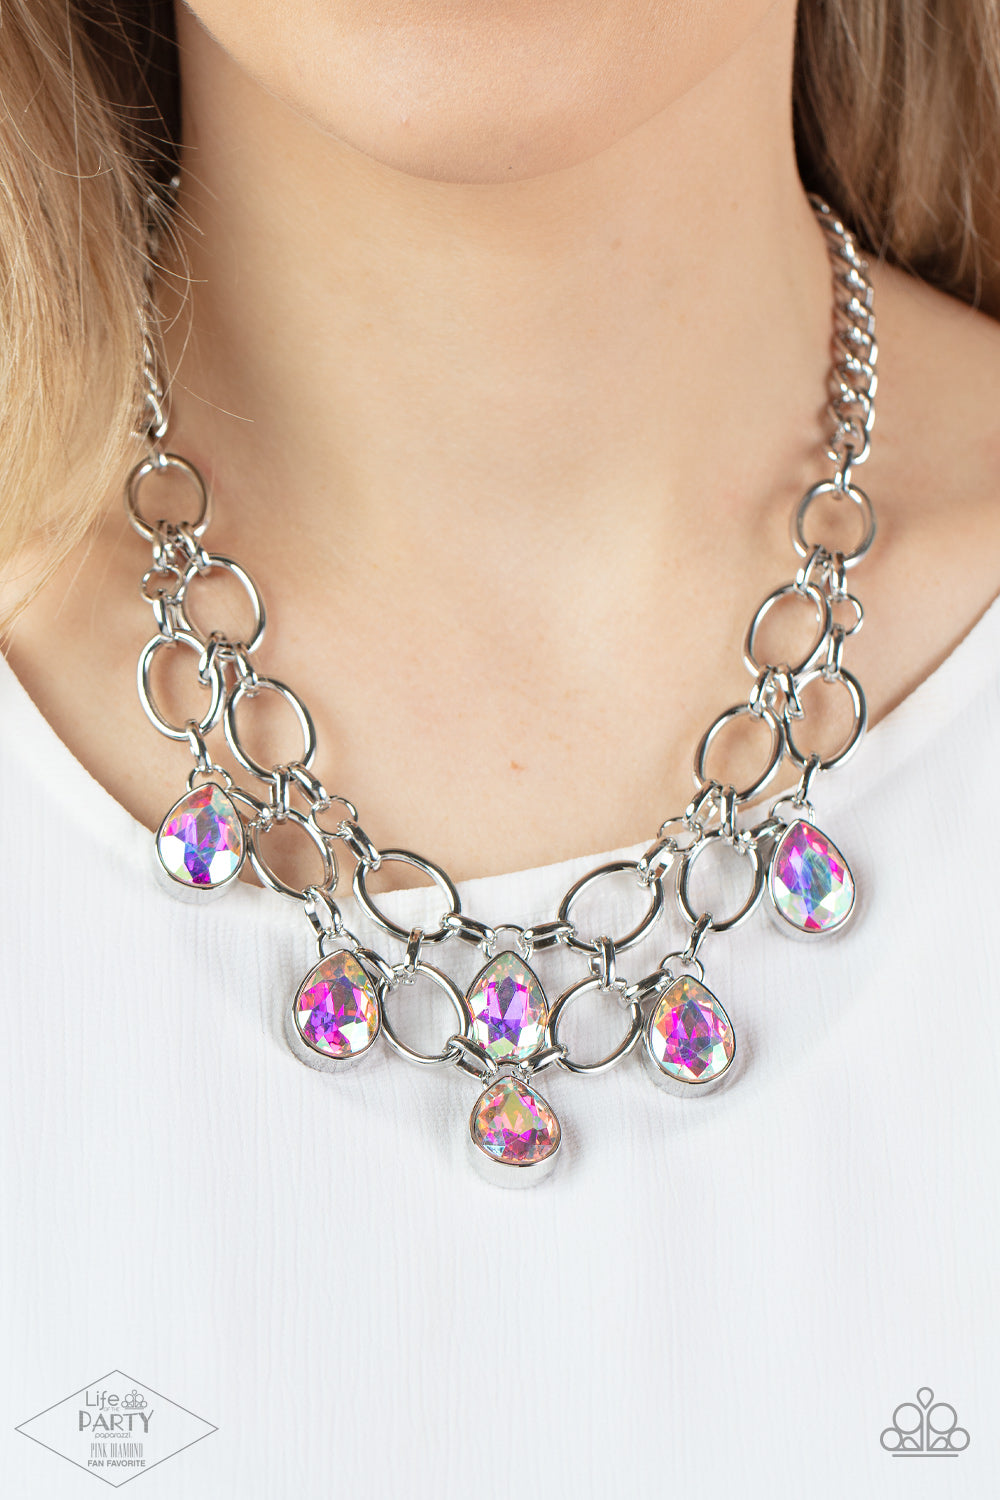 Joined by dainty silver links, two rows of dramatic silver chain layer below the collar in a fierce fashion. Iridescent teardrop gems drip from the glistening layers, adding a timeless shimmer to the show-stopping piece. Features an adjustable clasp closure.  Sold as one individual necklace. Includes one pair of matching earrings.   FANFAVORITE